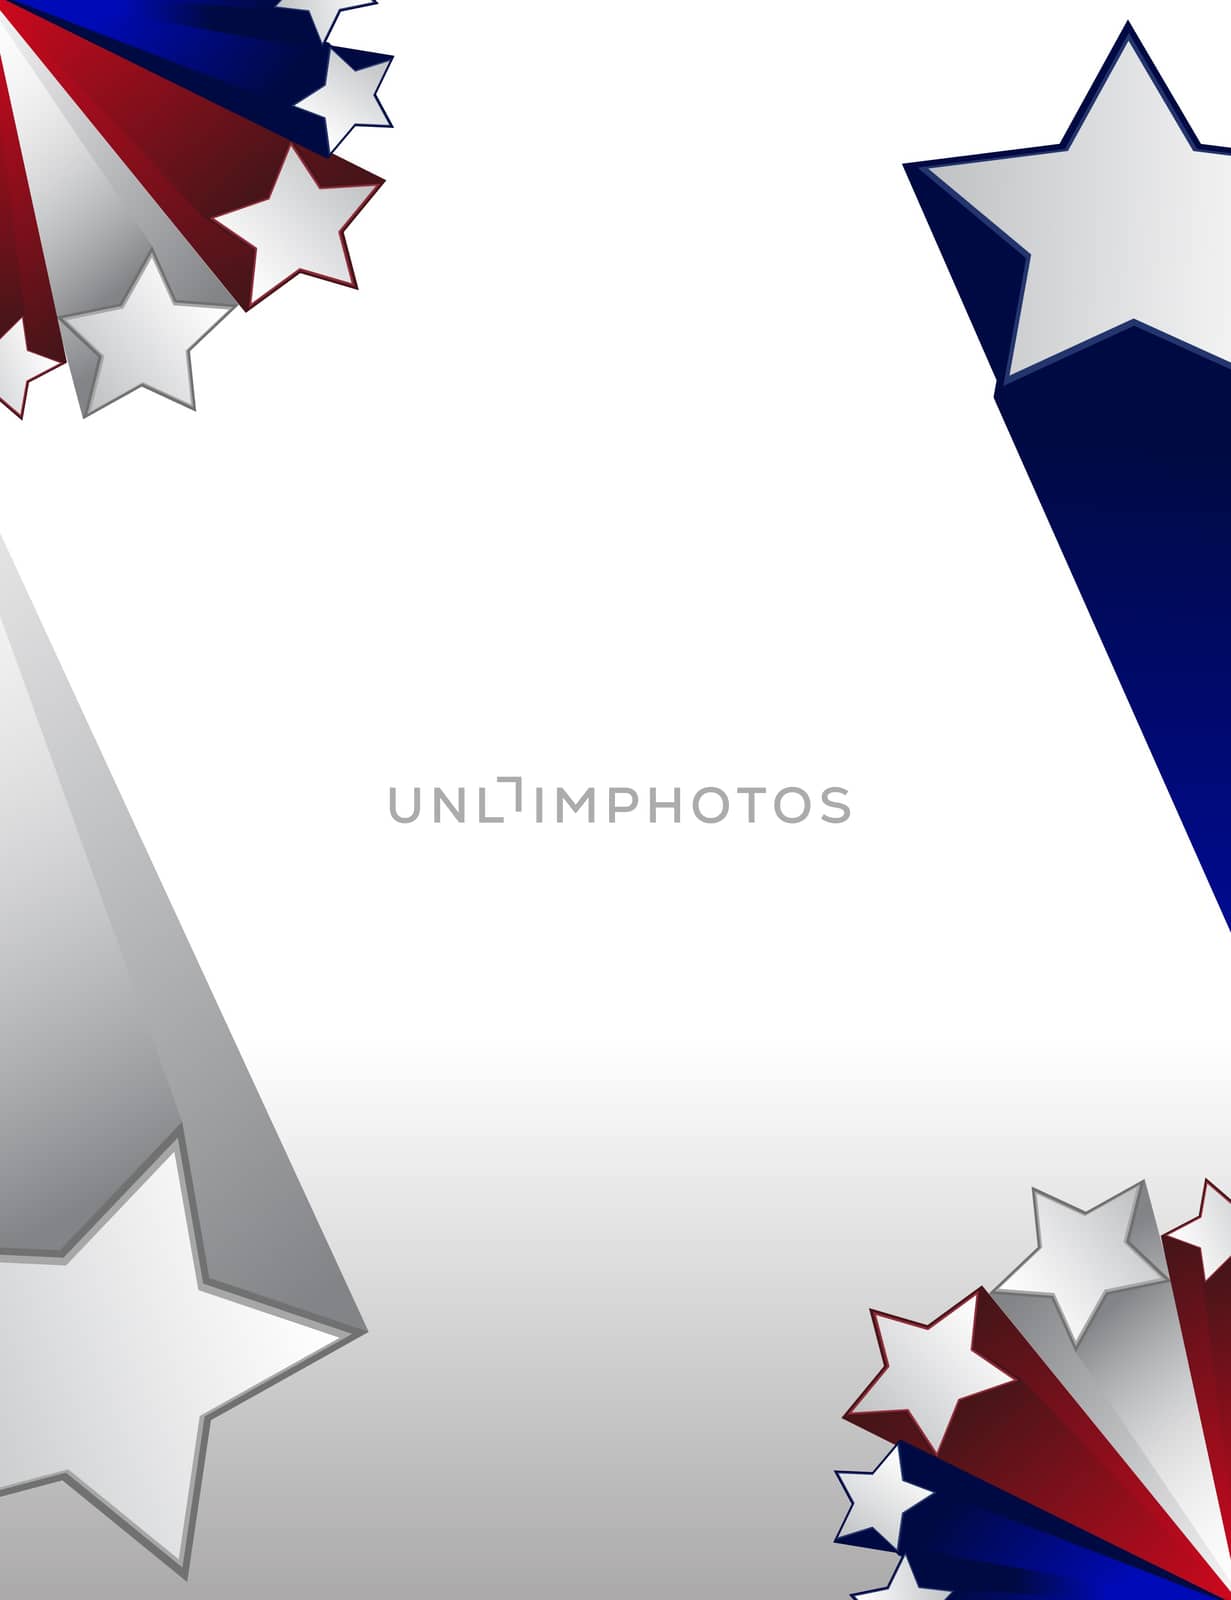 Red white and blue stars boarder over a gradient background.